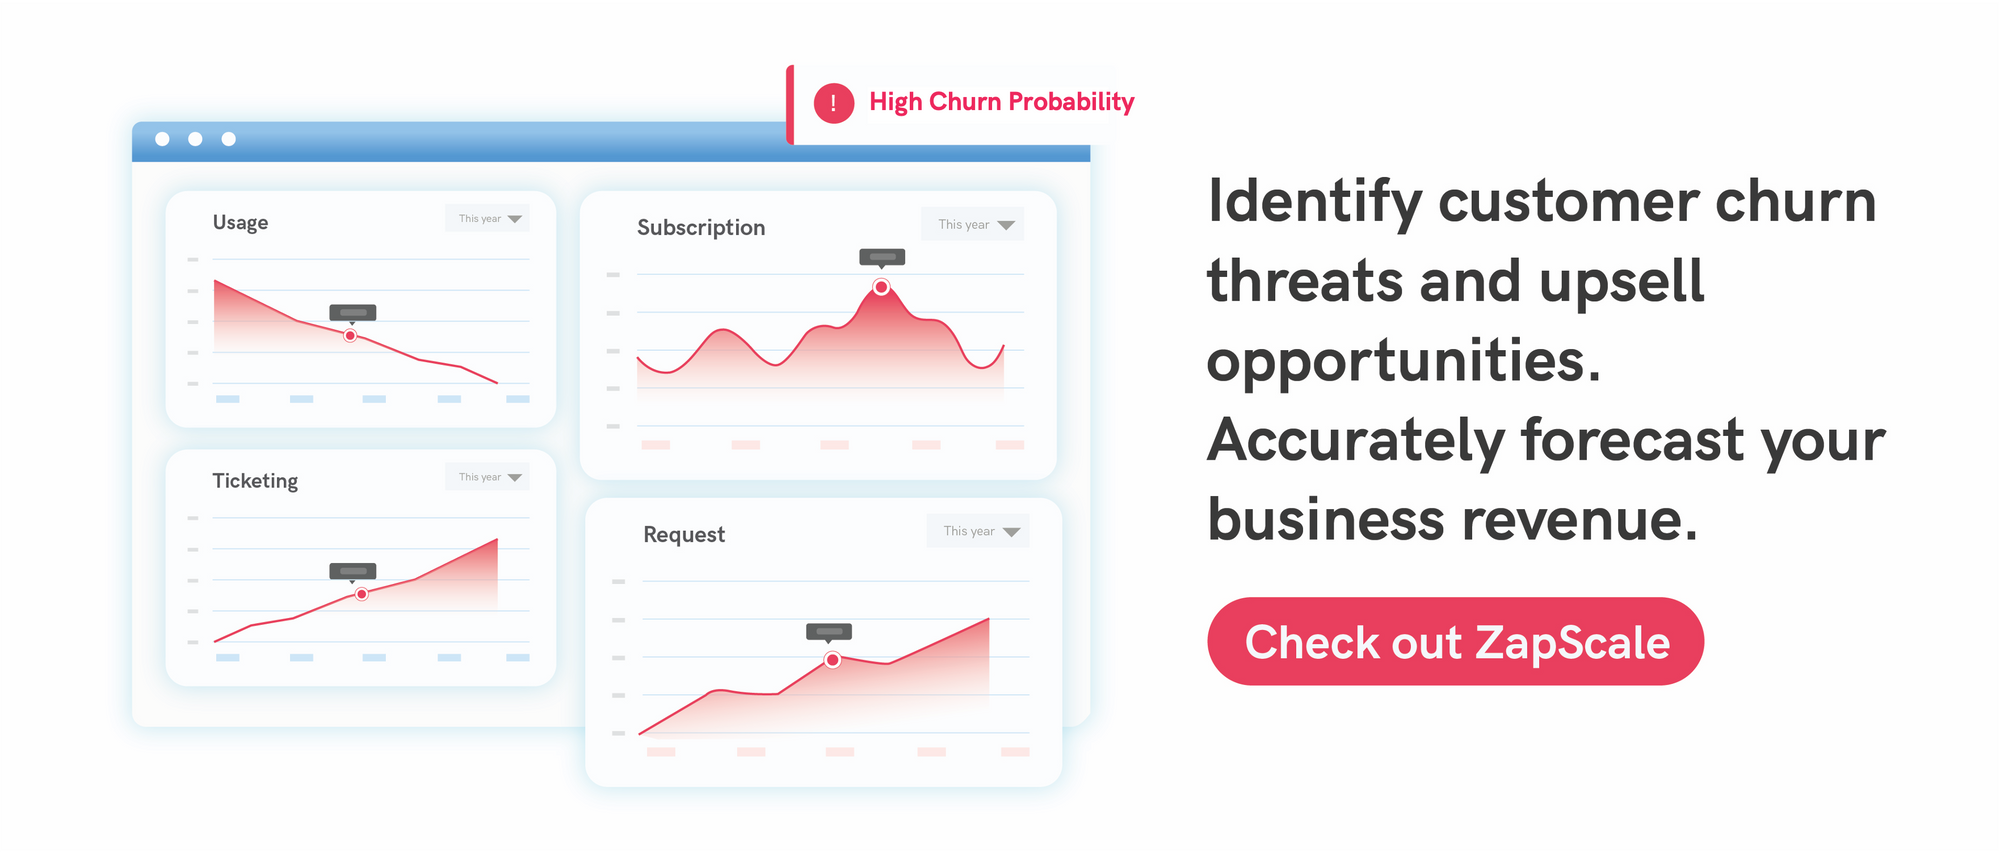 ZapScale product screenshot showing how it helps SaaS businesses to identify customer churn threats and upsell opportunities